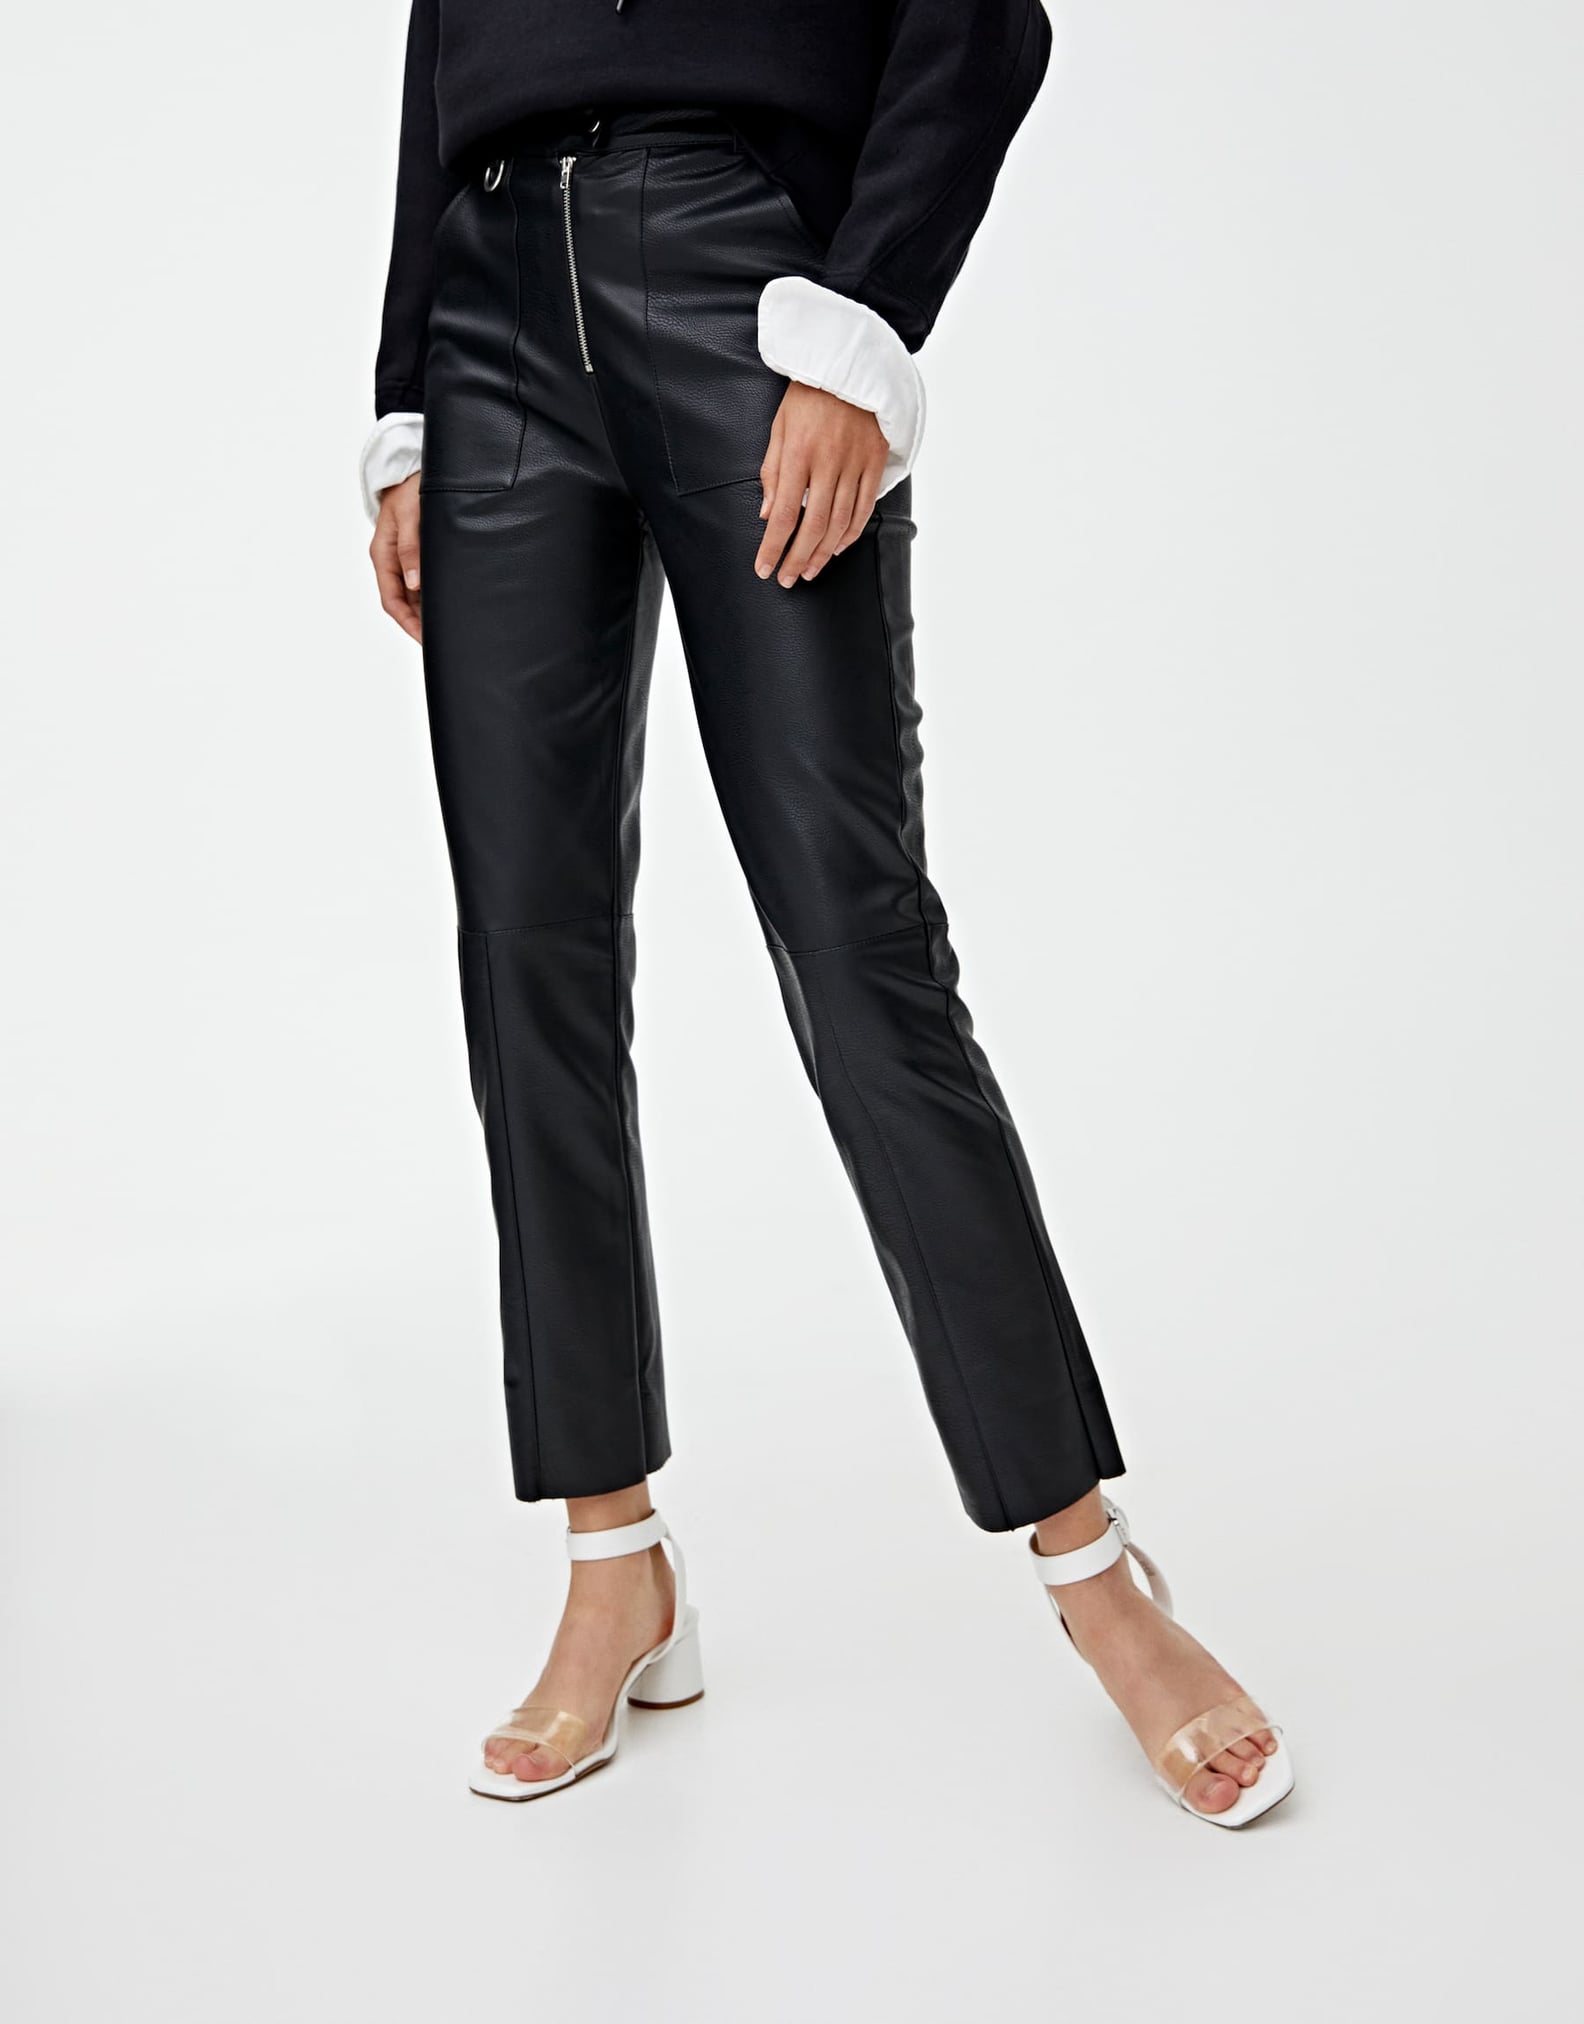 The Best Fall Pants Trends to Shop For Women | POPSUGAR Fashion